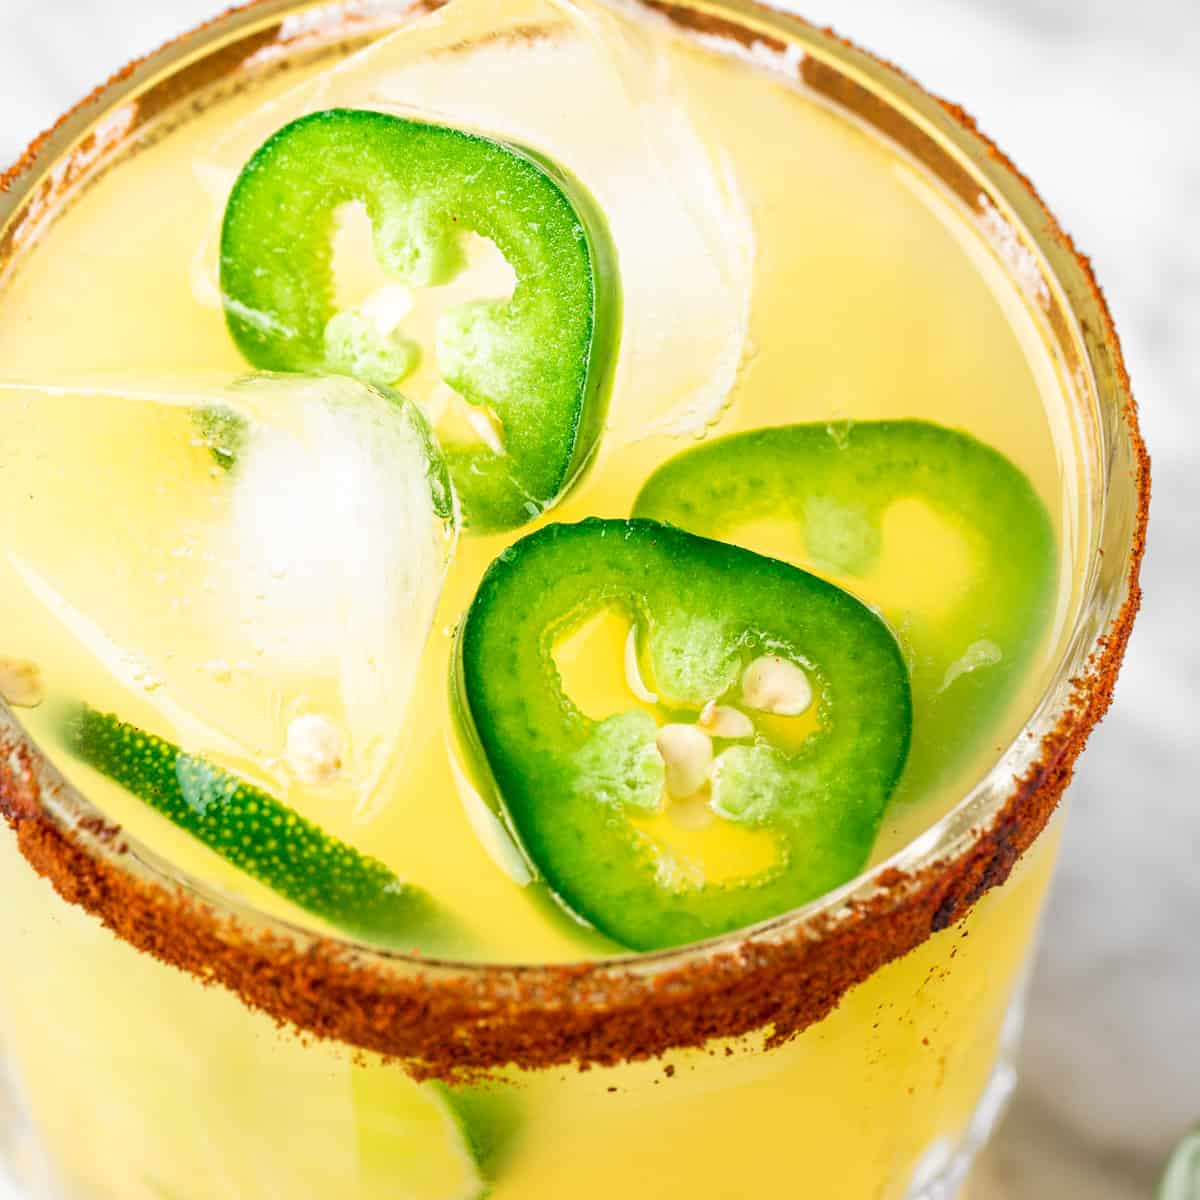 A spicy margarita mocktail garnished with jalapeno slices.